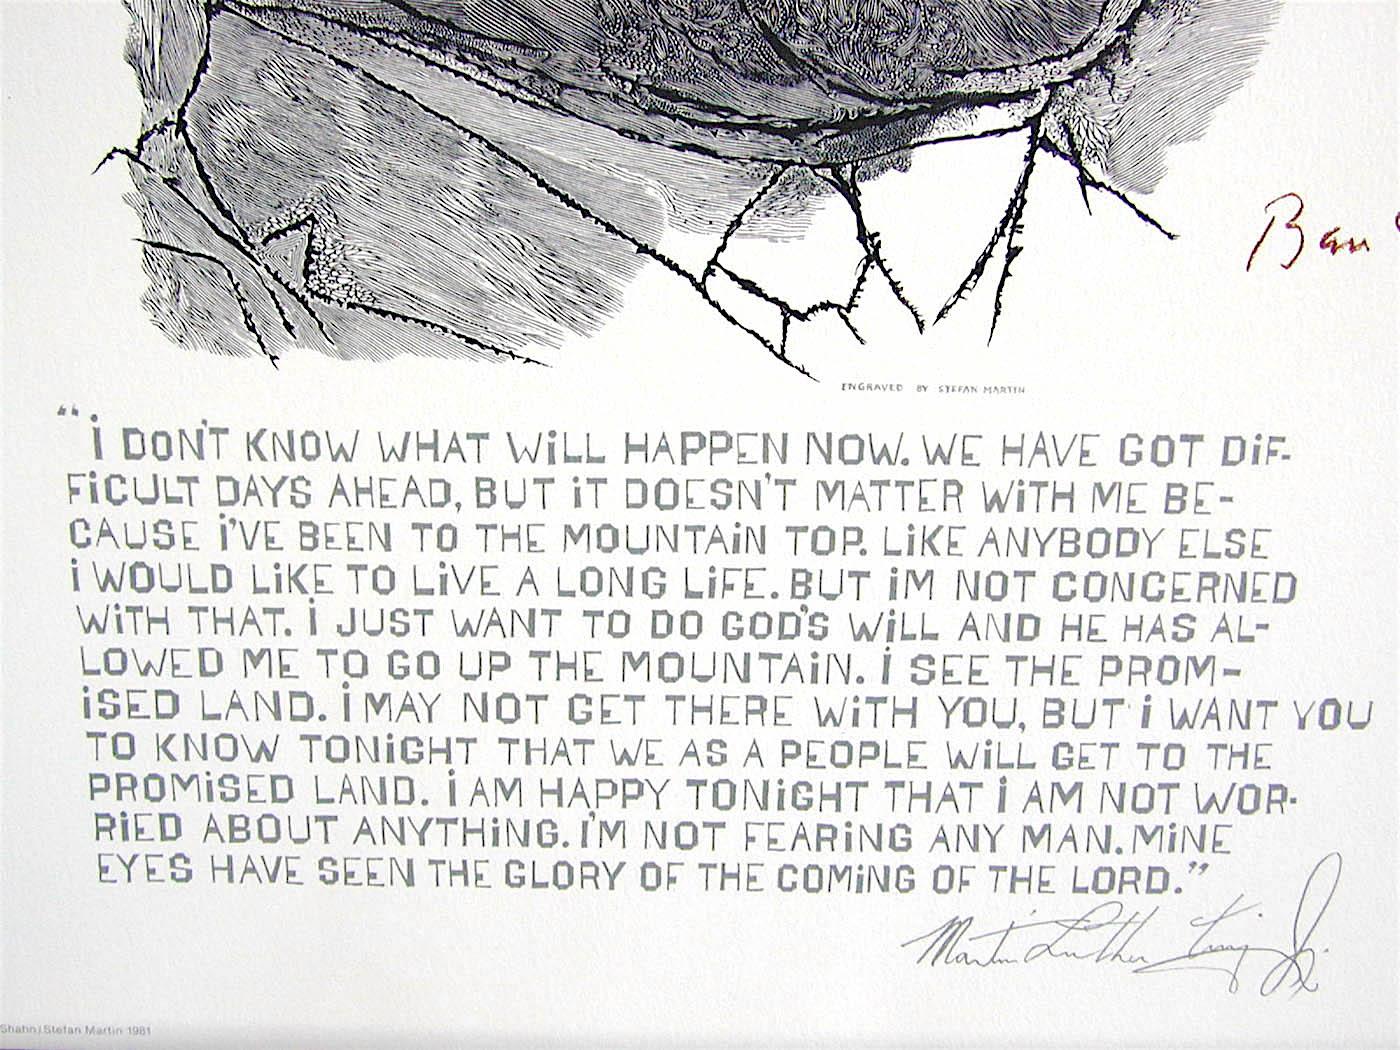 Martin Luther King Jr.- I Have A Dream,  Stefan Martin BW Portrait, Civil Rights - Print by Ben Shahn